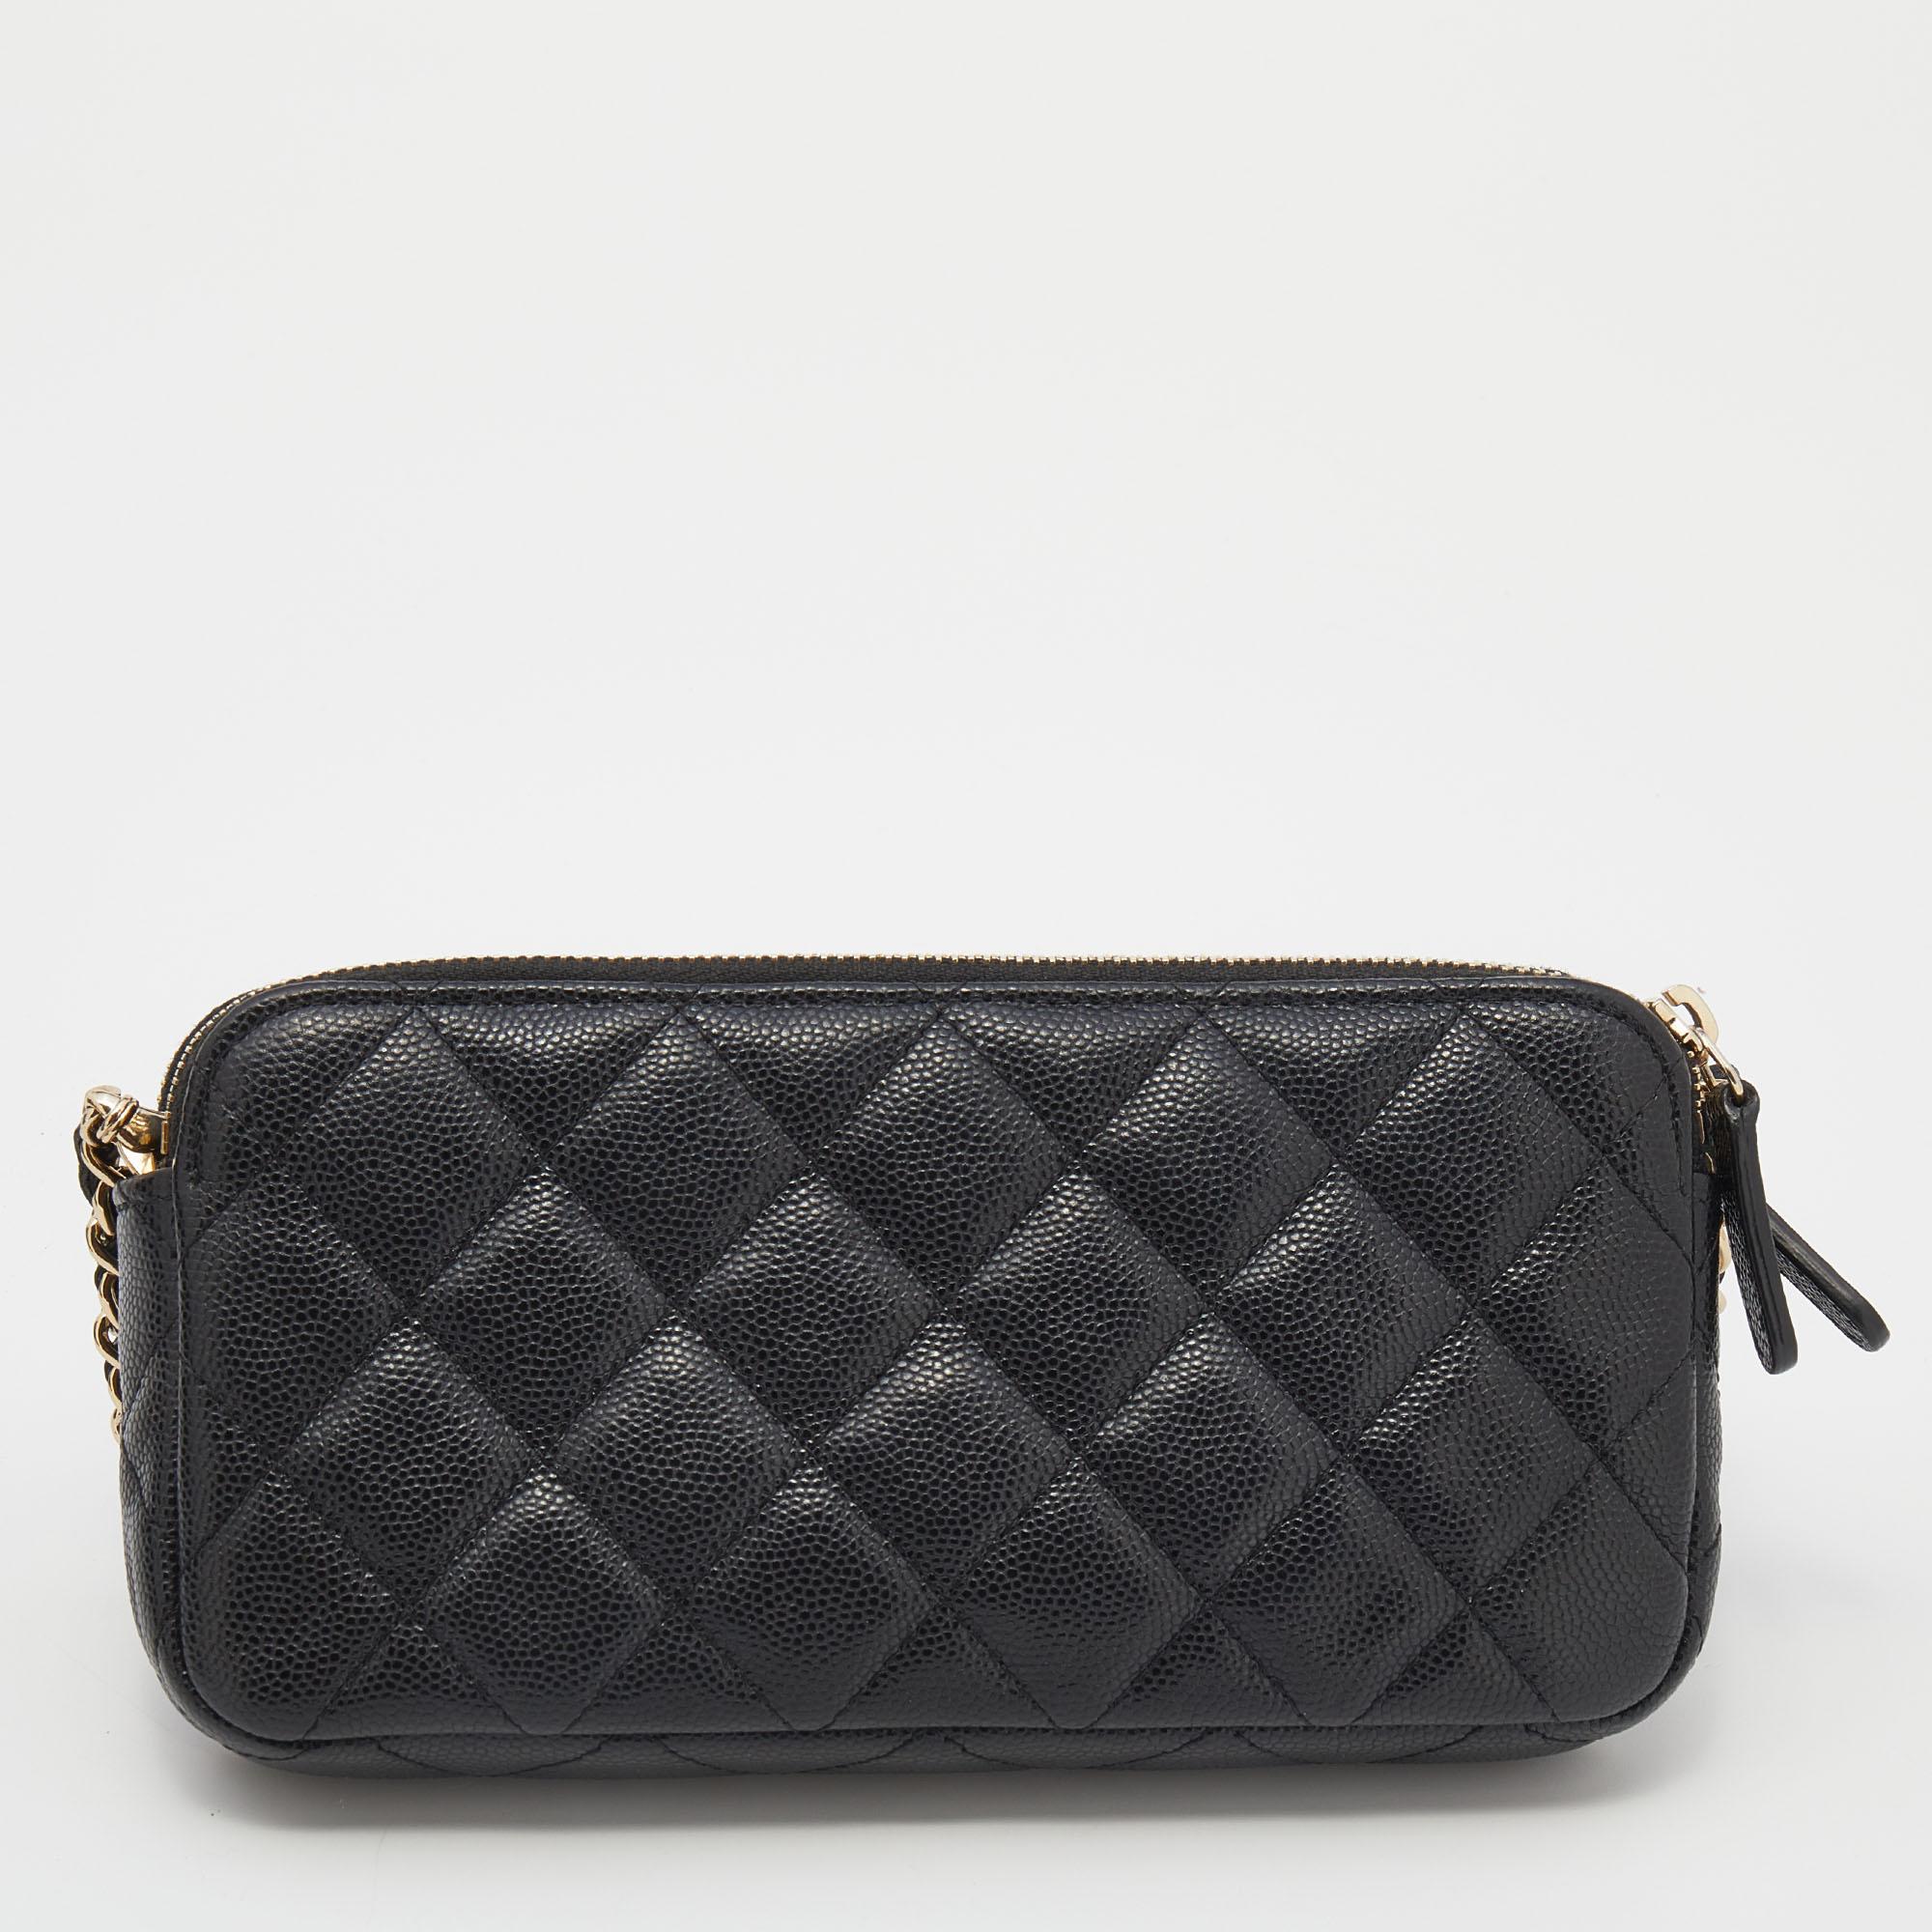 Crafted from black quilted Caviar leather, this wallet on chain by Chanel is something you will carry everywhere. It features a double zip closure, a signature interwoven chain strap, and gold-tone hardware. The interior is lined smoothly and